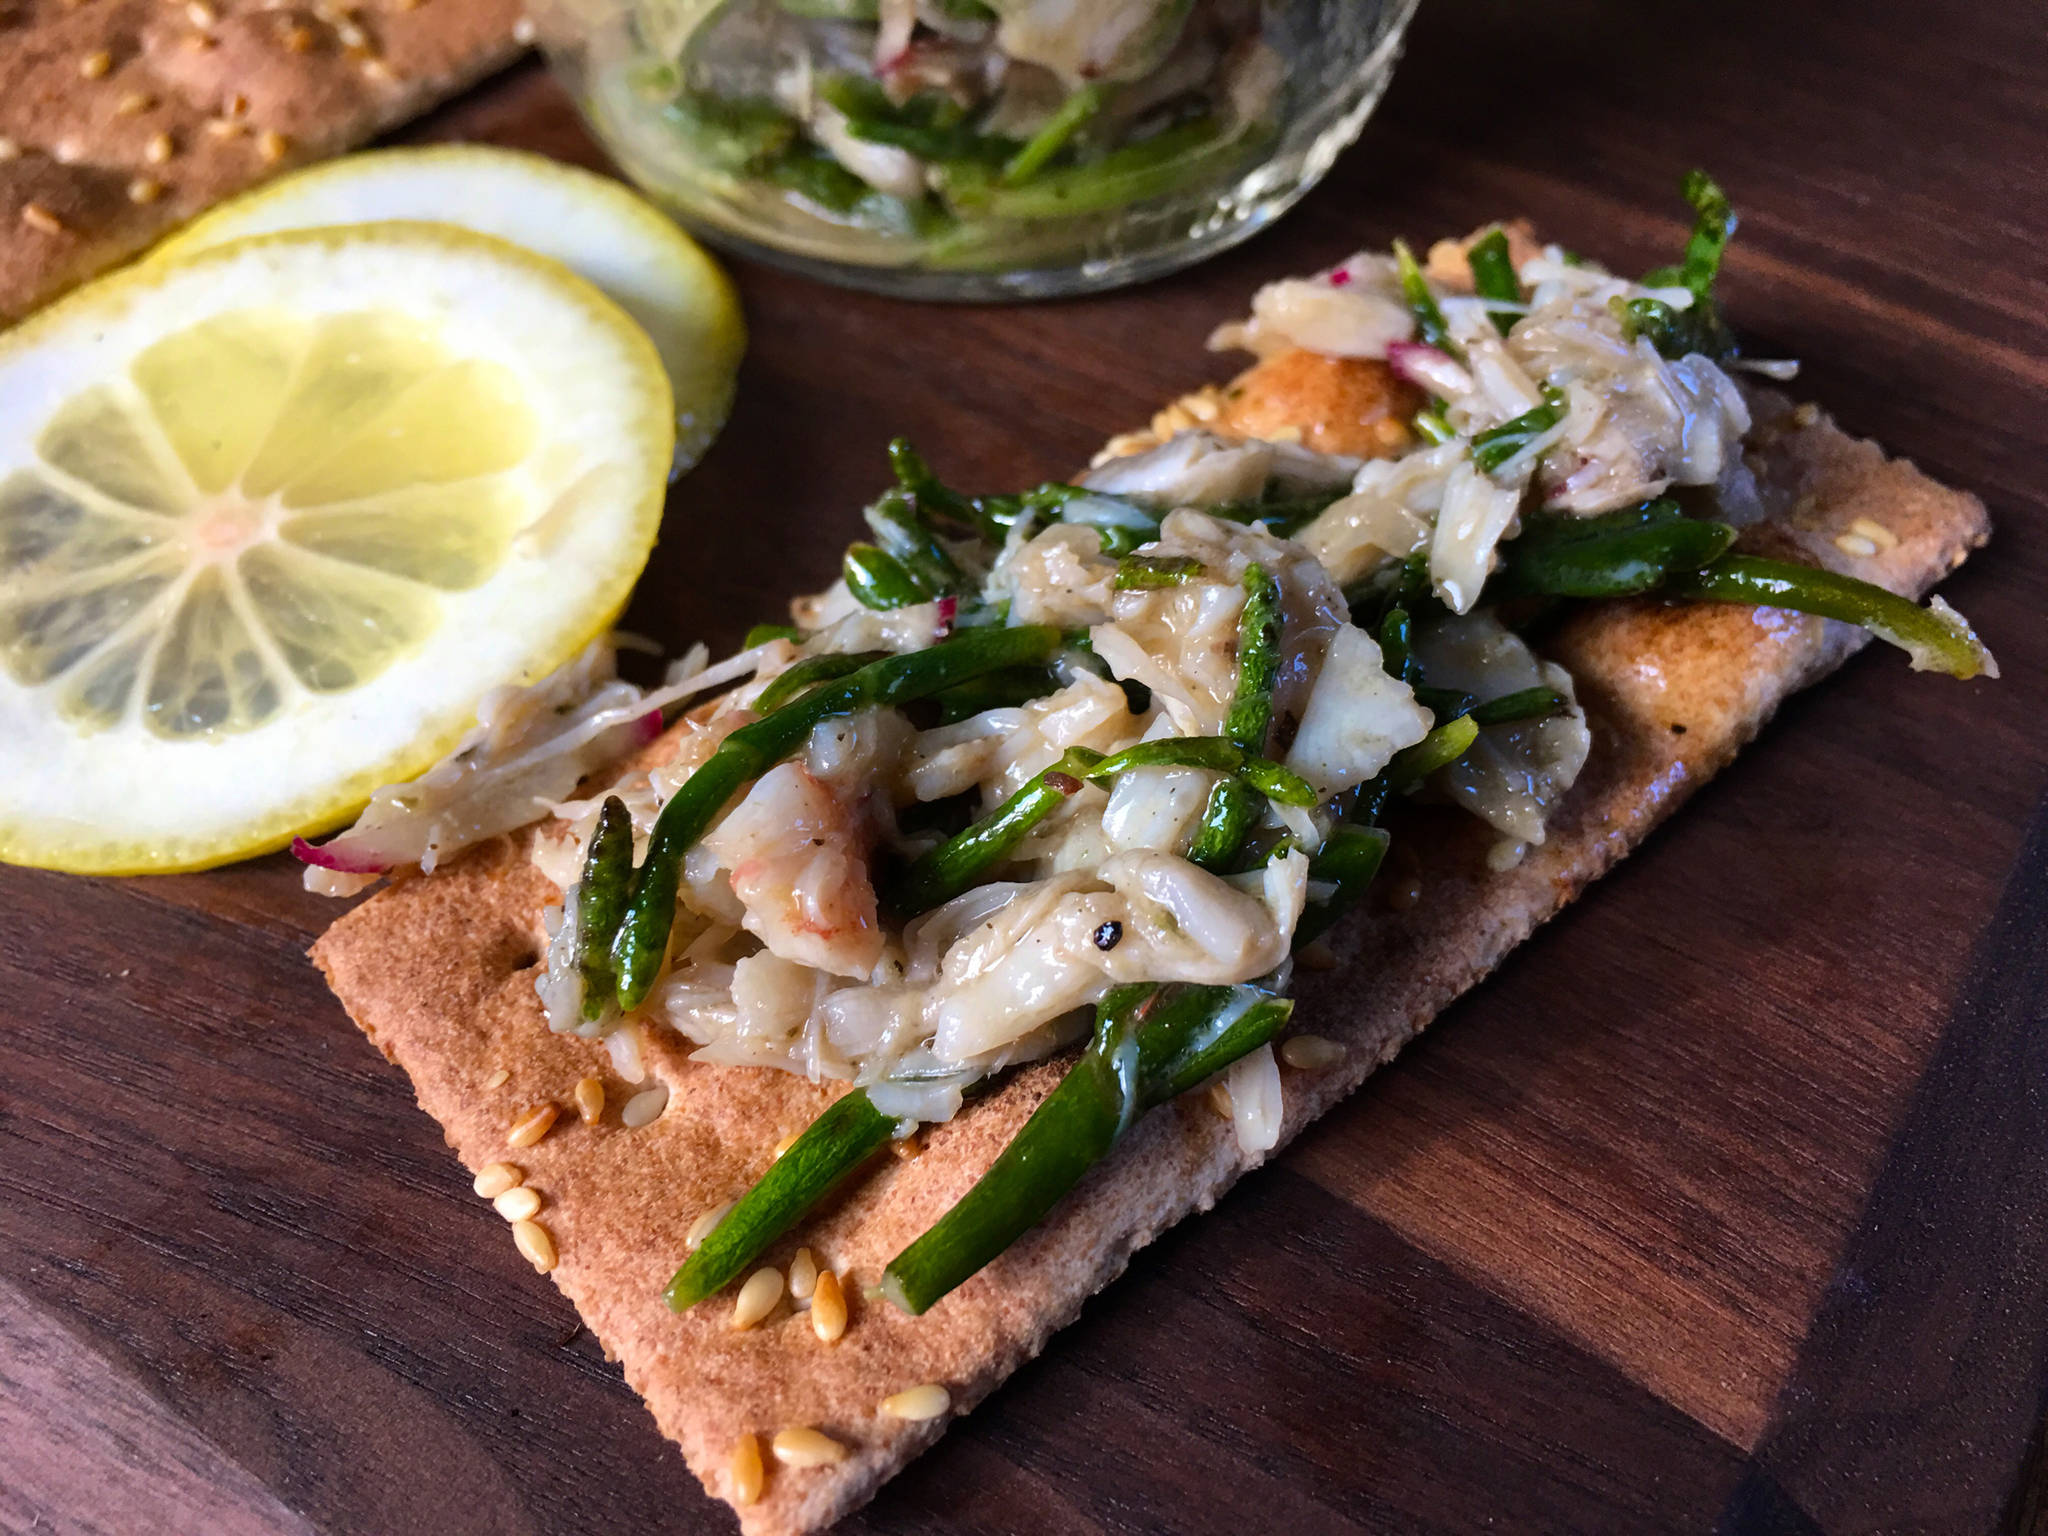 Eating Wild: Blistered Beach Asparagus & Dungeness Crab Salad